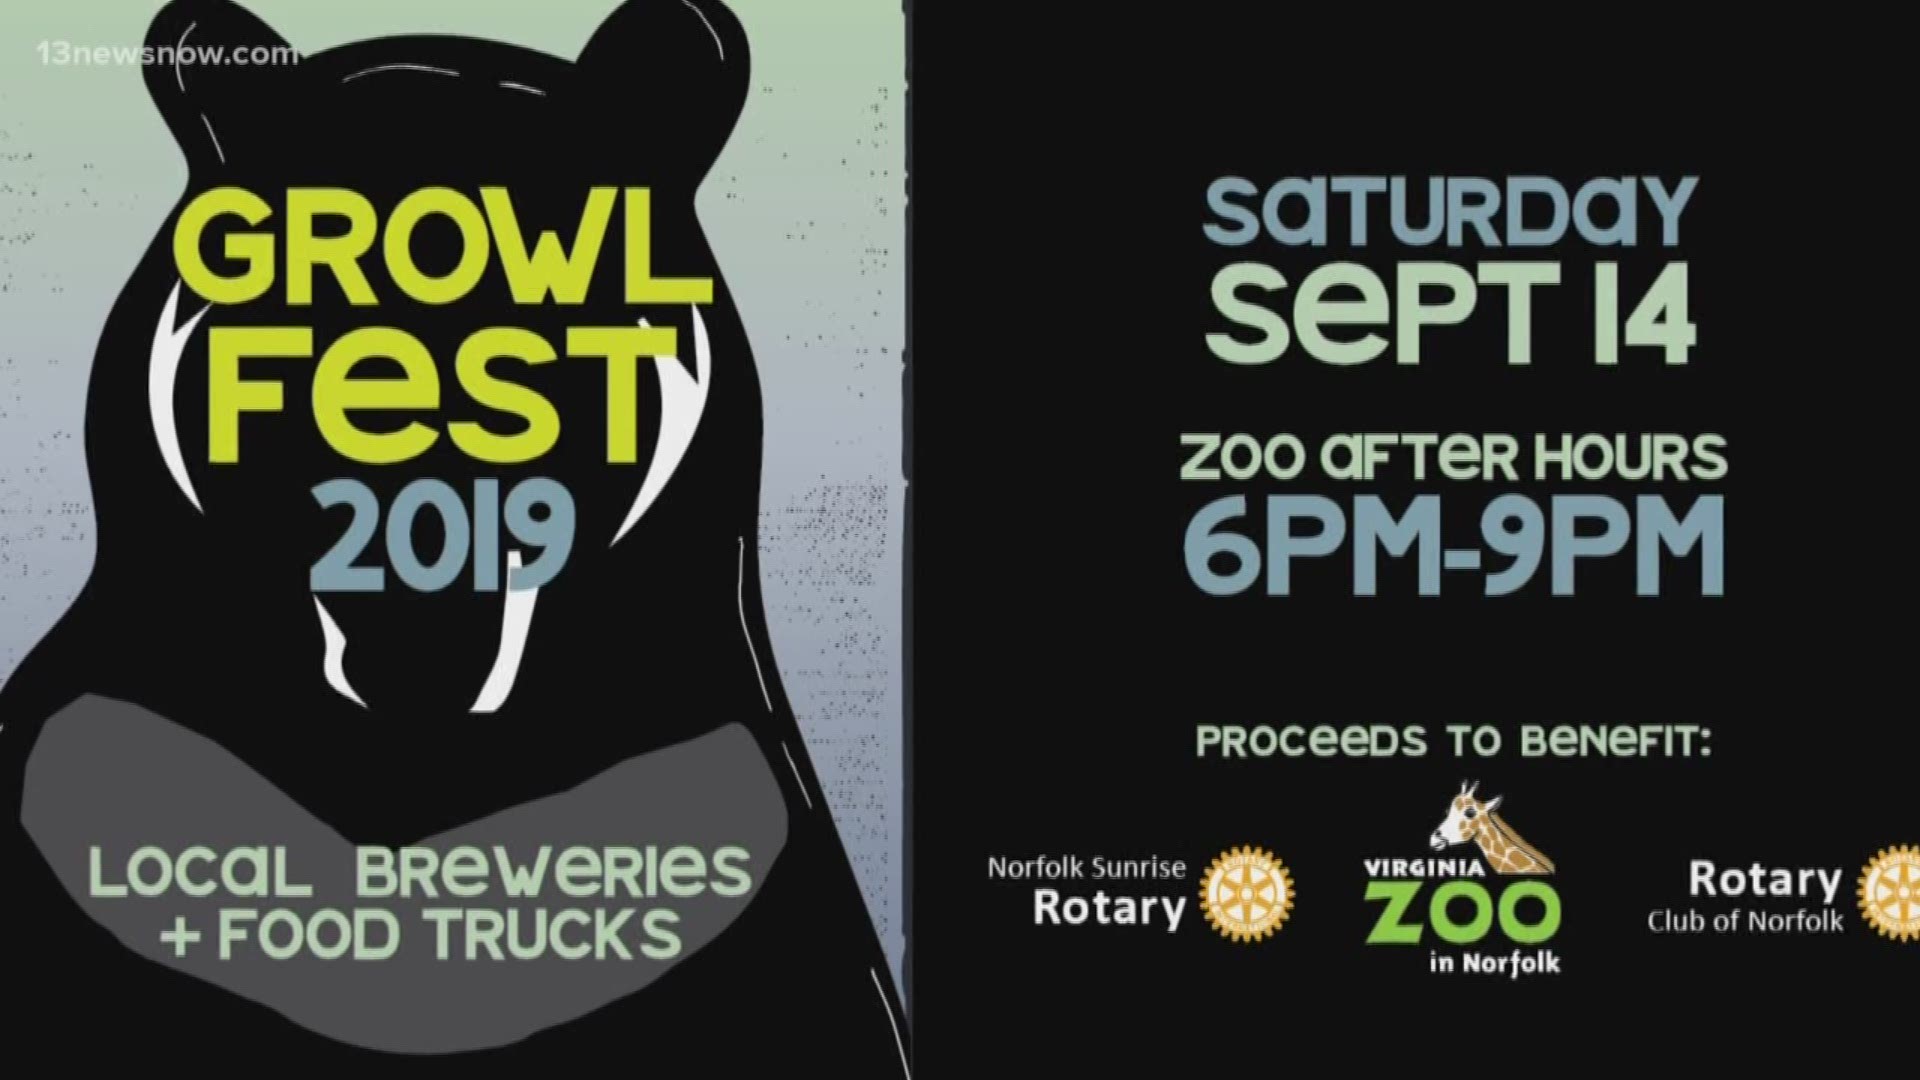 Growl fest is returning to the Virginia Zoo! The beer festival is family-friendly with plenty to enjoy for all ages!